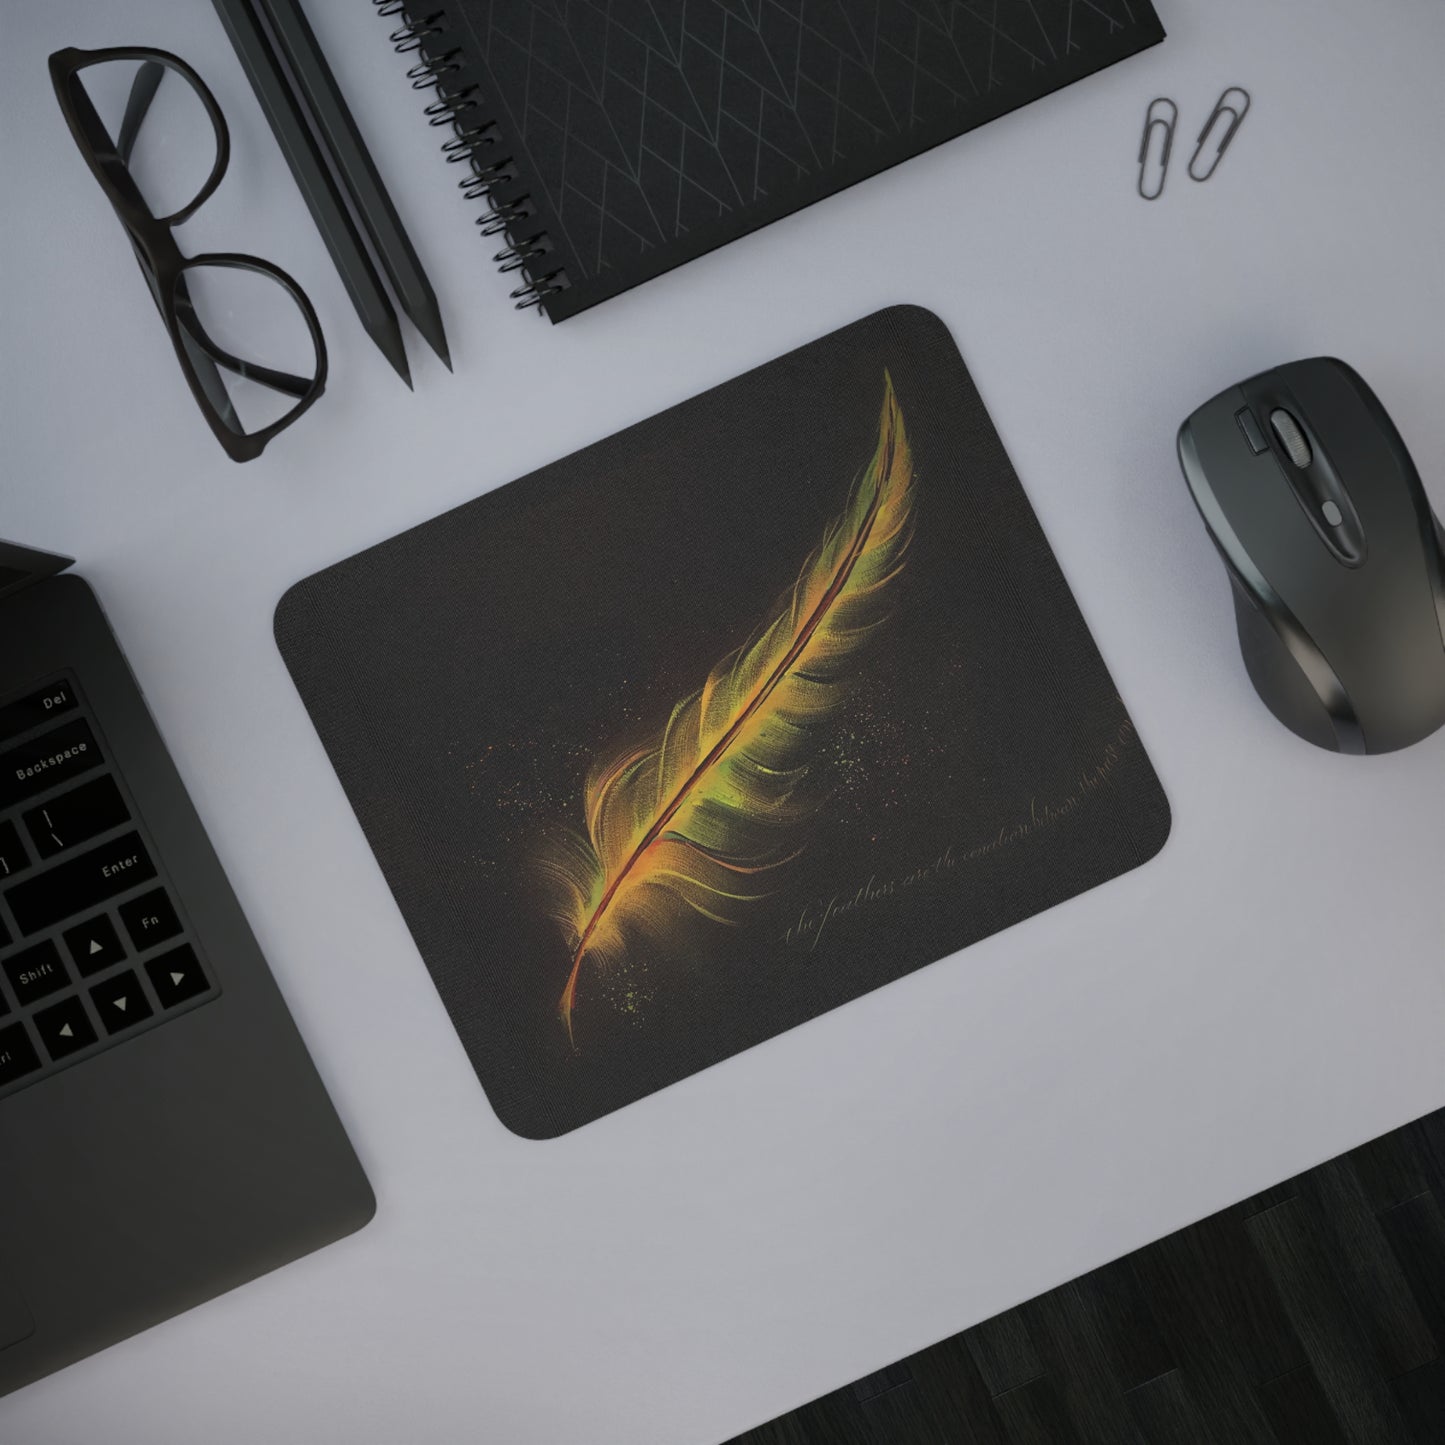 Mouse Pad - "Peacock's feather"